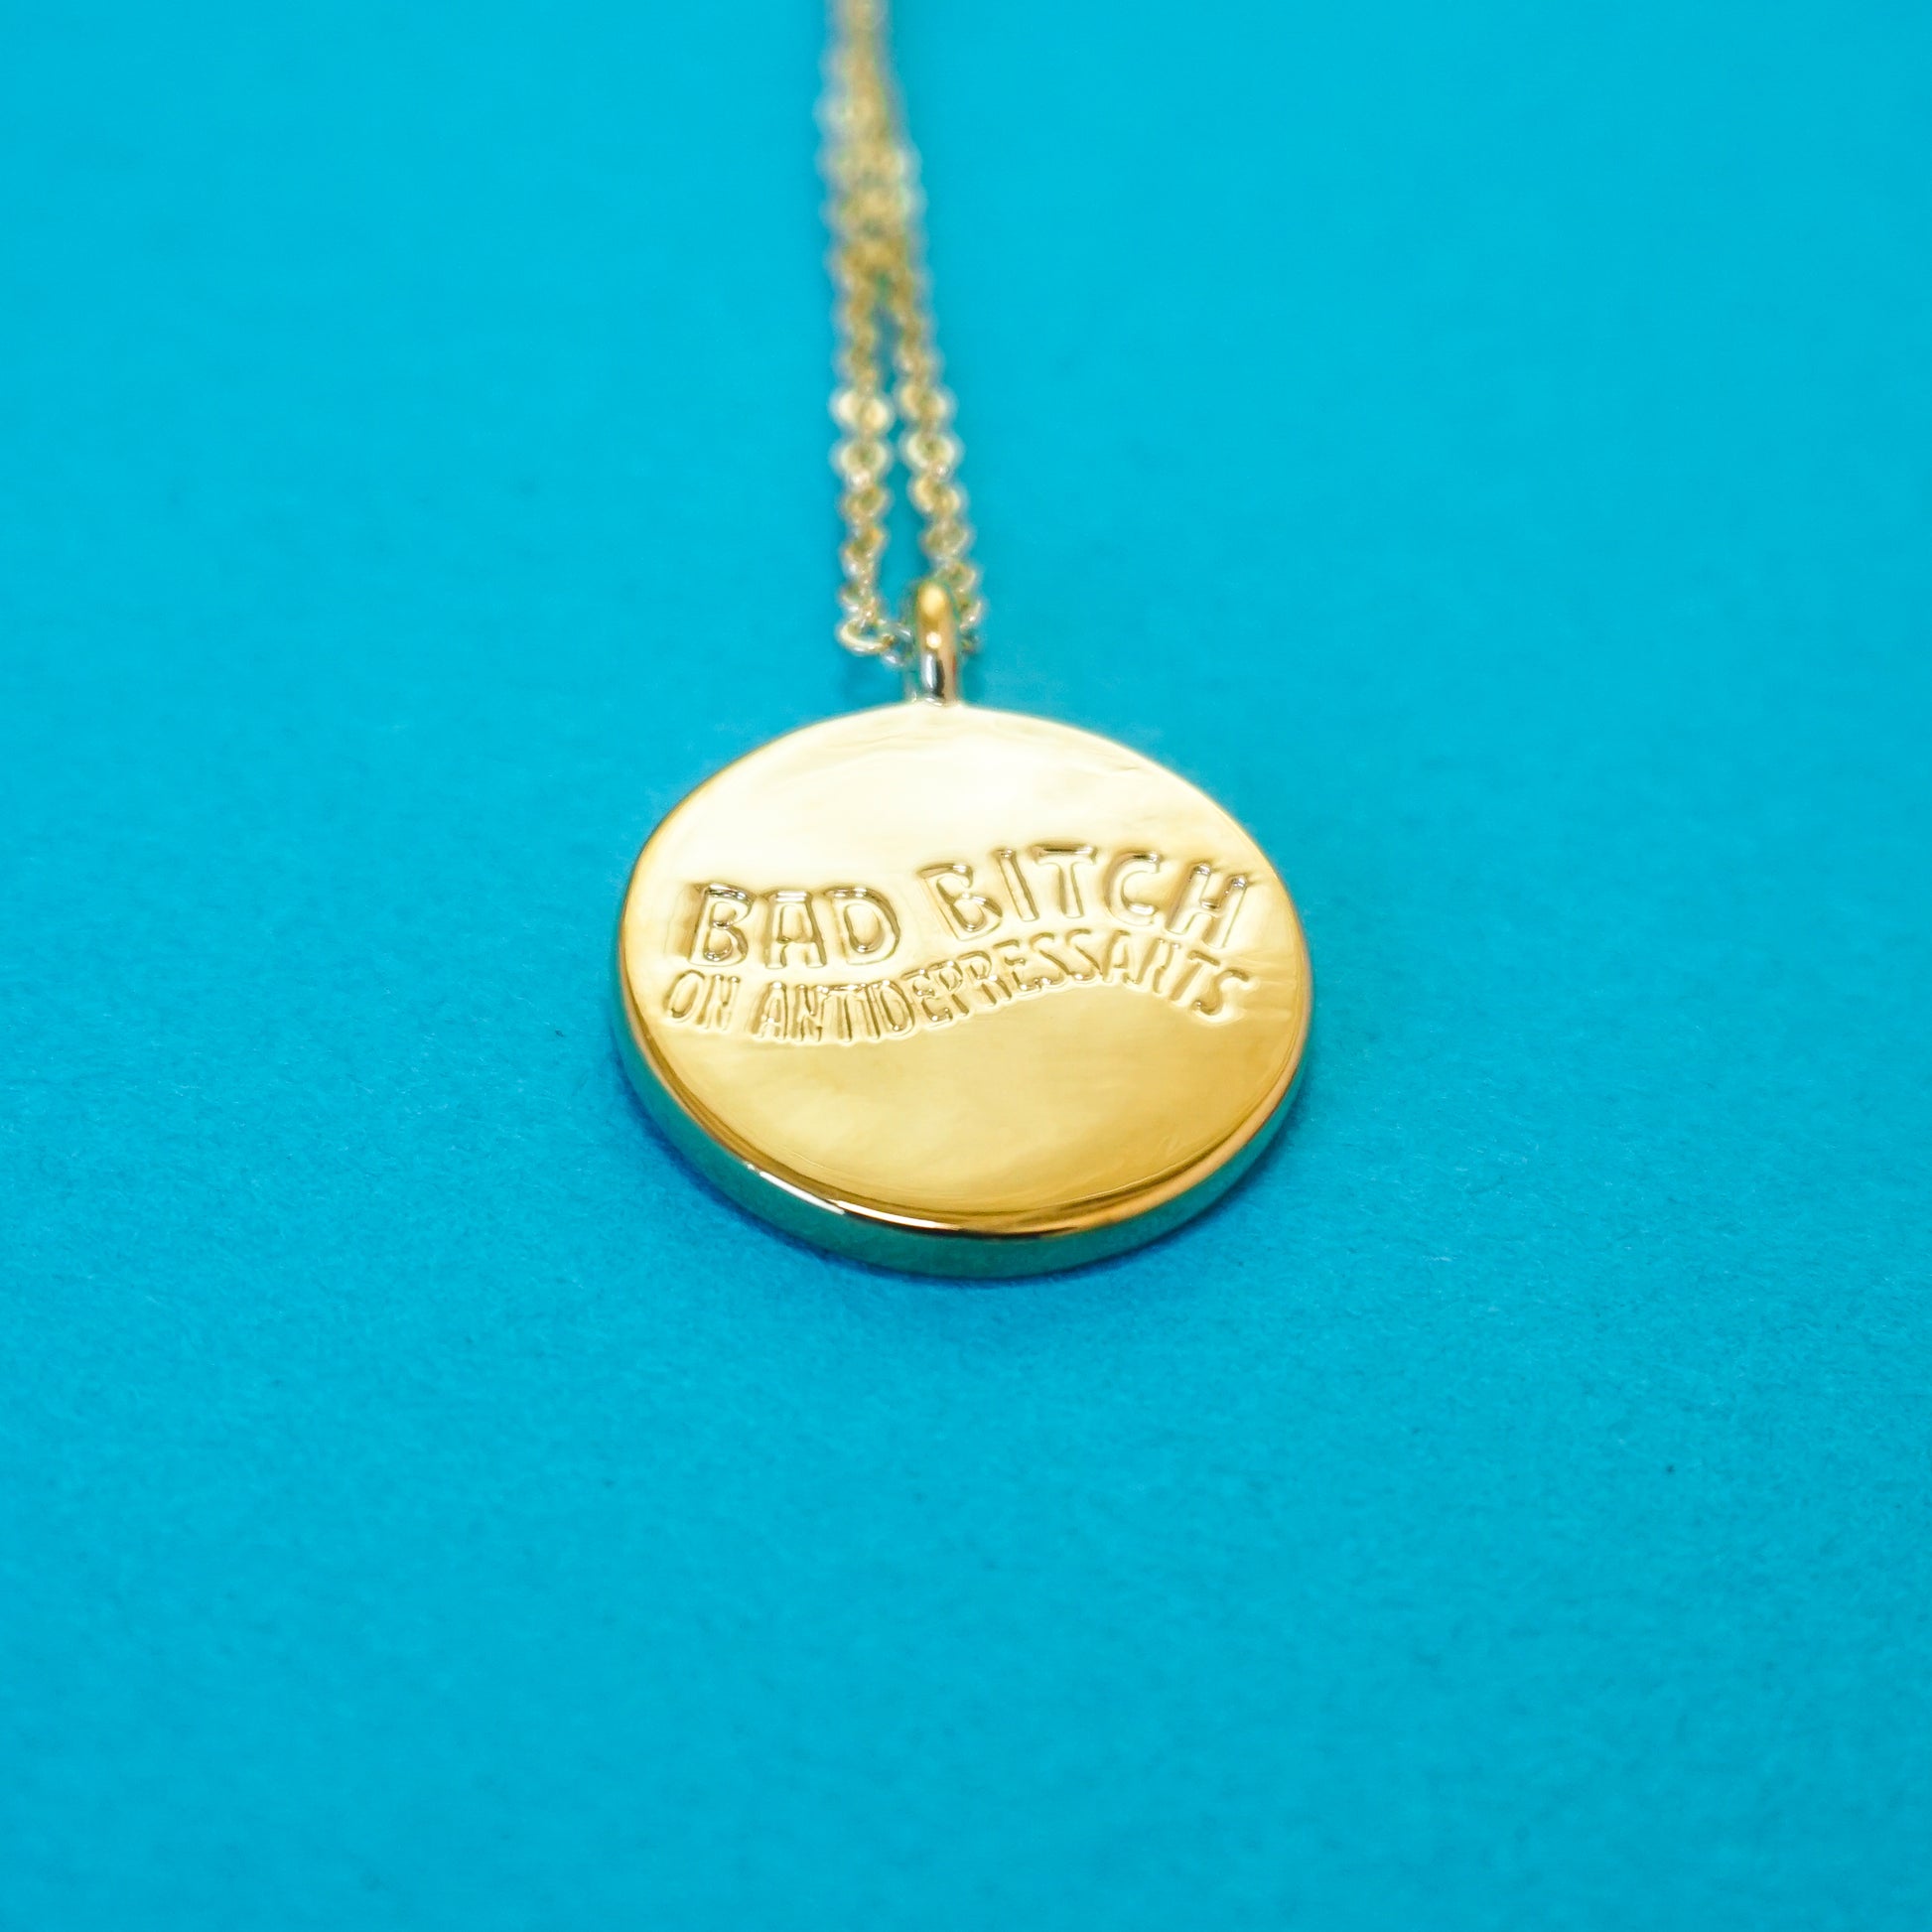 Bad Bitch on Antidepressants necklace - Brownie Points for You